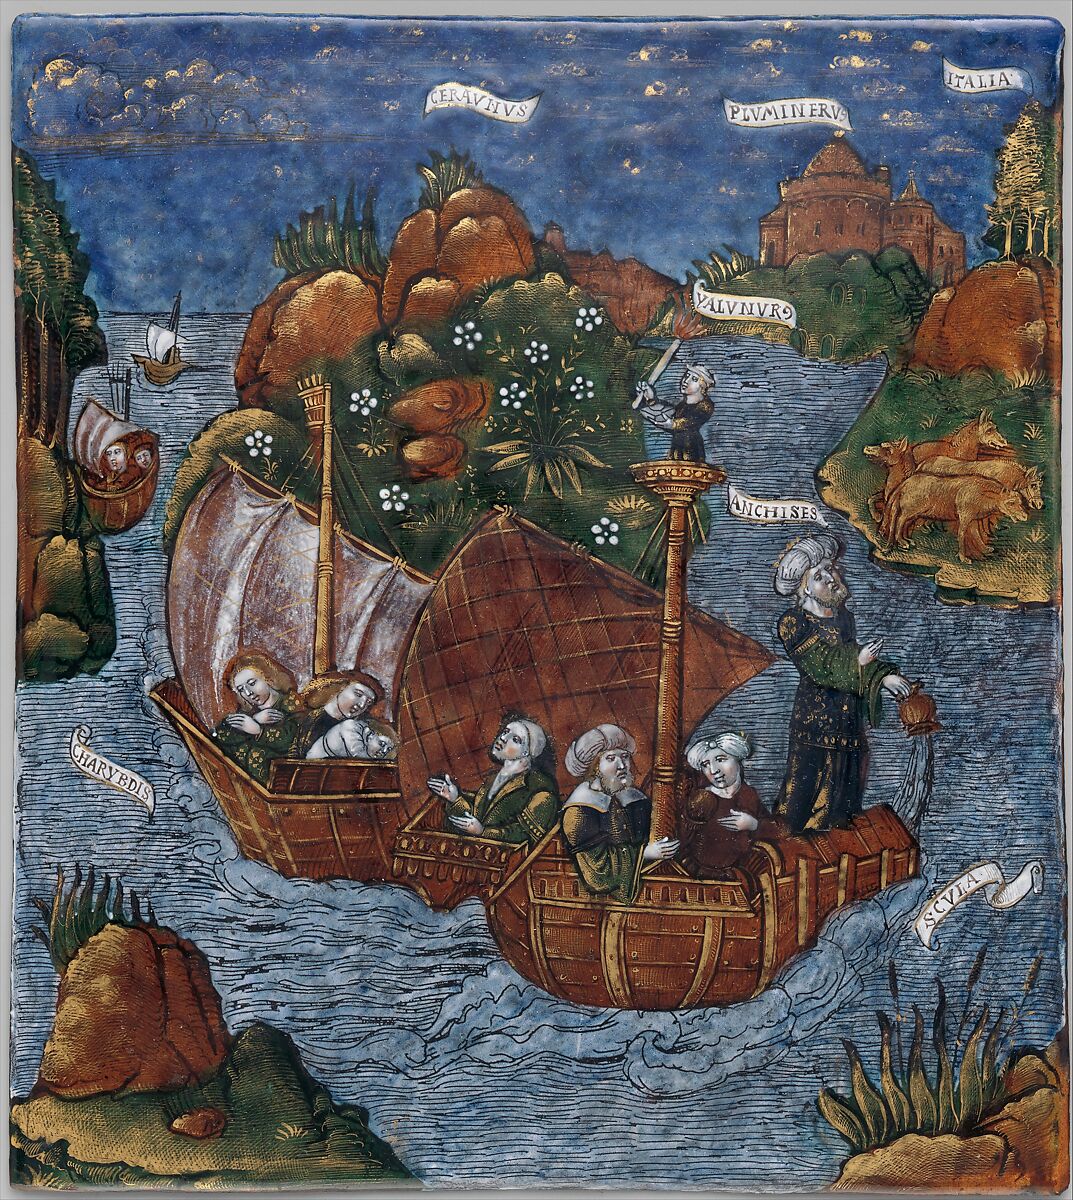 The Fleet of Aeneas Arrives in Sight of Italy (Aeneid, Book III), Master of the Aeneid (active ca. 1530–40), Painted enamel on copper, partly gilt, French, Limoges 